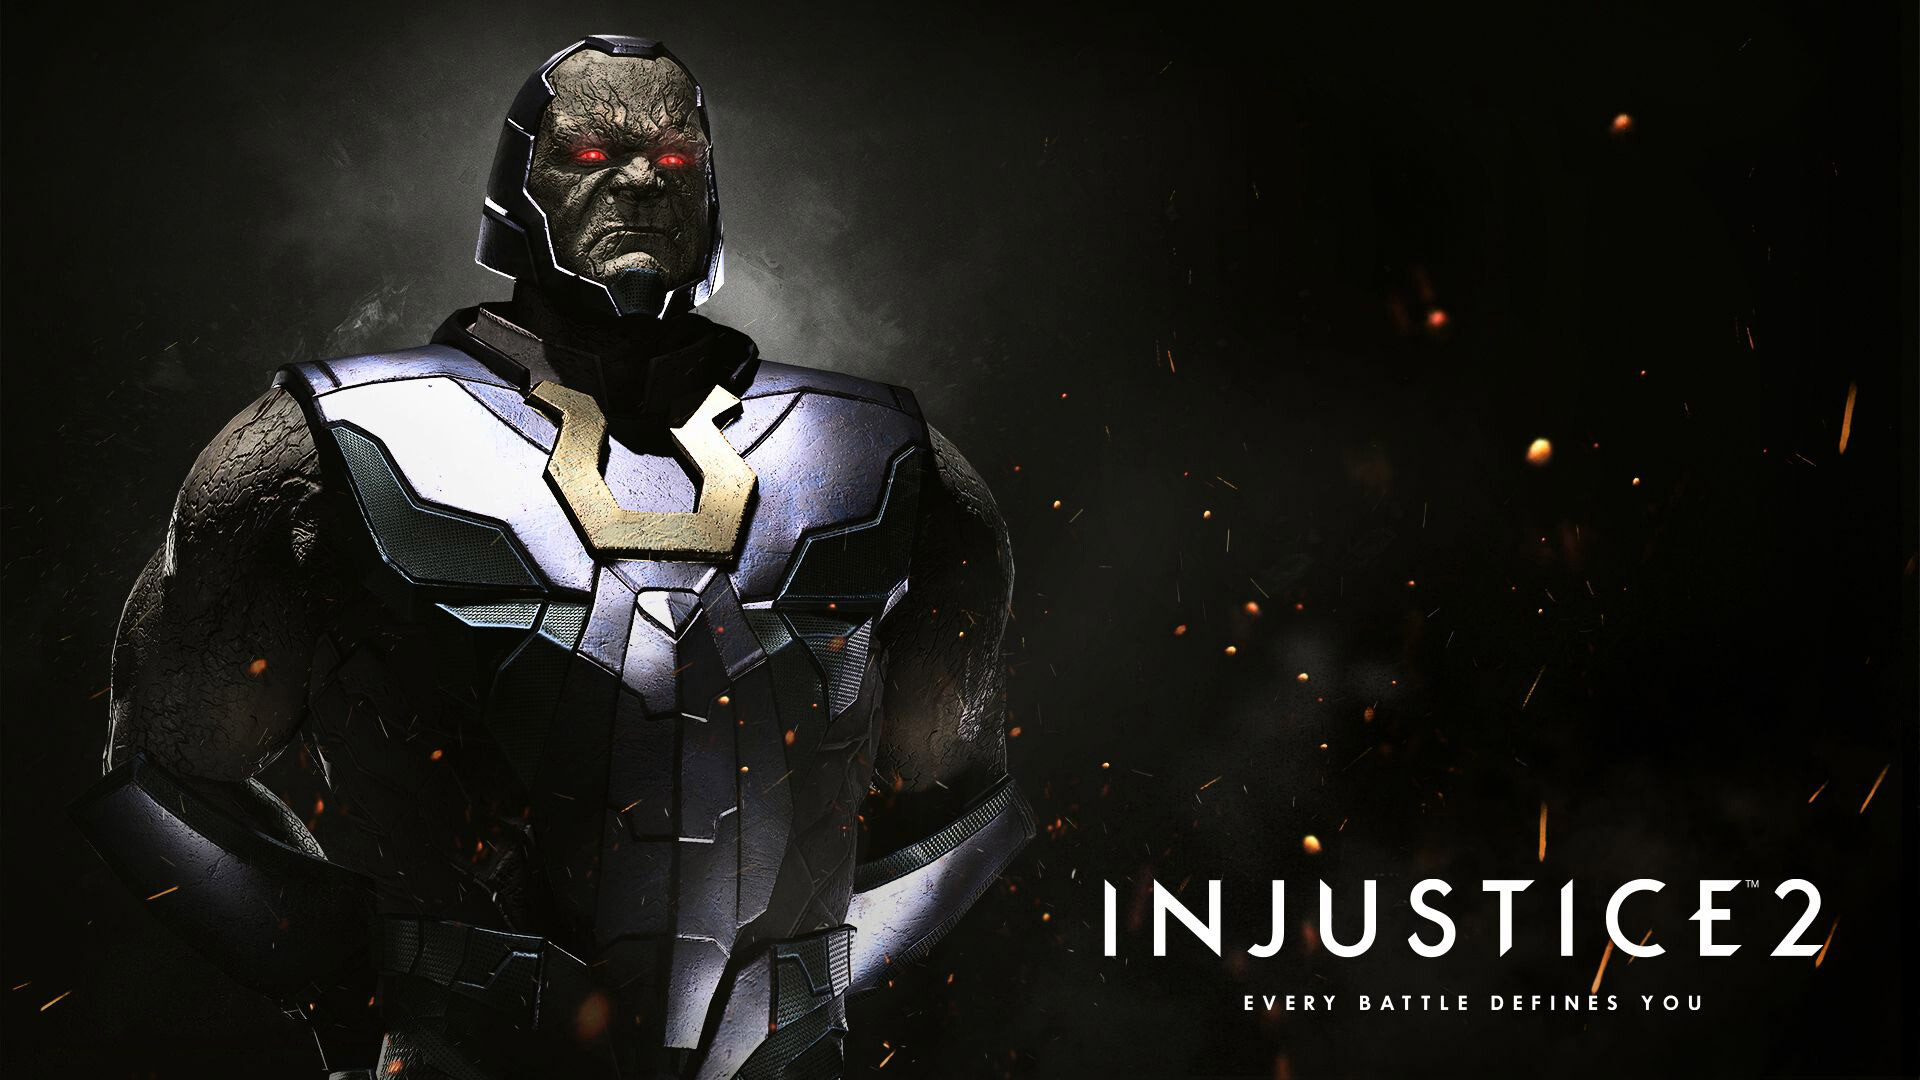 Injustice: The game won numerous awards and received positive reviews from critics, who praised its story, presentation, improved gameplay mechanics, abundance of in-game content, and character customization options. 1920x1080 Full HD Background.